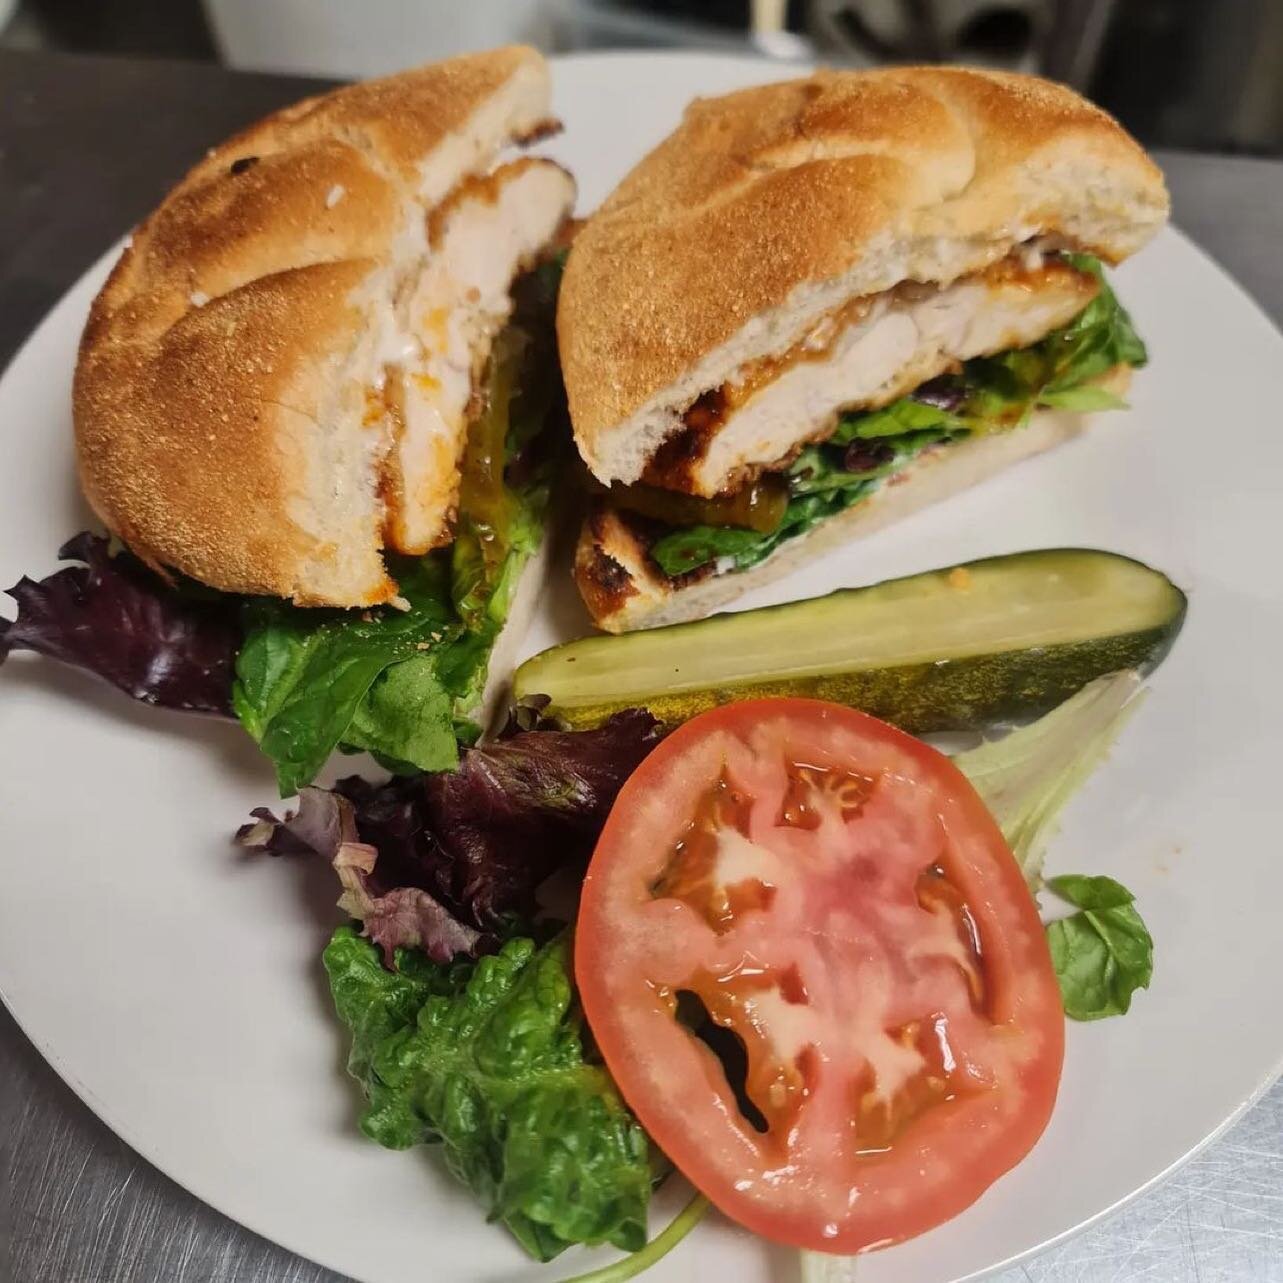 @mybrewbakers

Try our new Nashville Chicken Sandwich Special 😋

Order now:
https://www.mybrewbakers.com/product/nashville-hot-chicken-sandwich/784?cp=true&amp;sa=false&amp;sbp=false&amp;q=false&amp;category_id=43

#nashville #nashvillechicken #chic